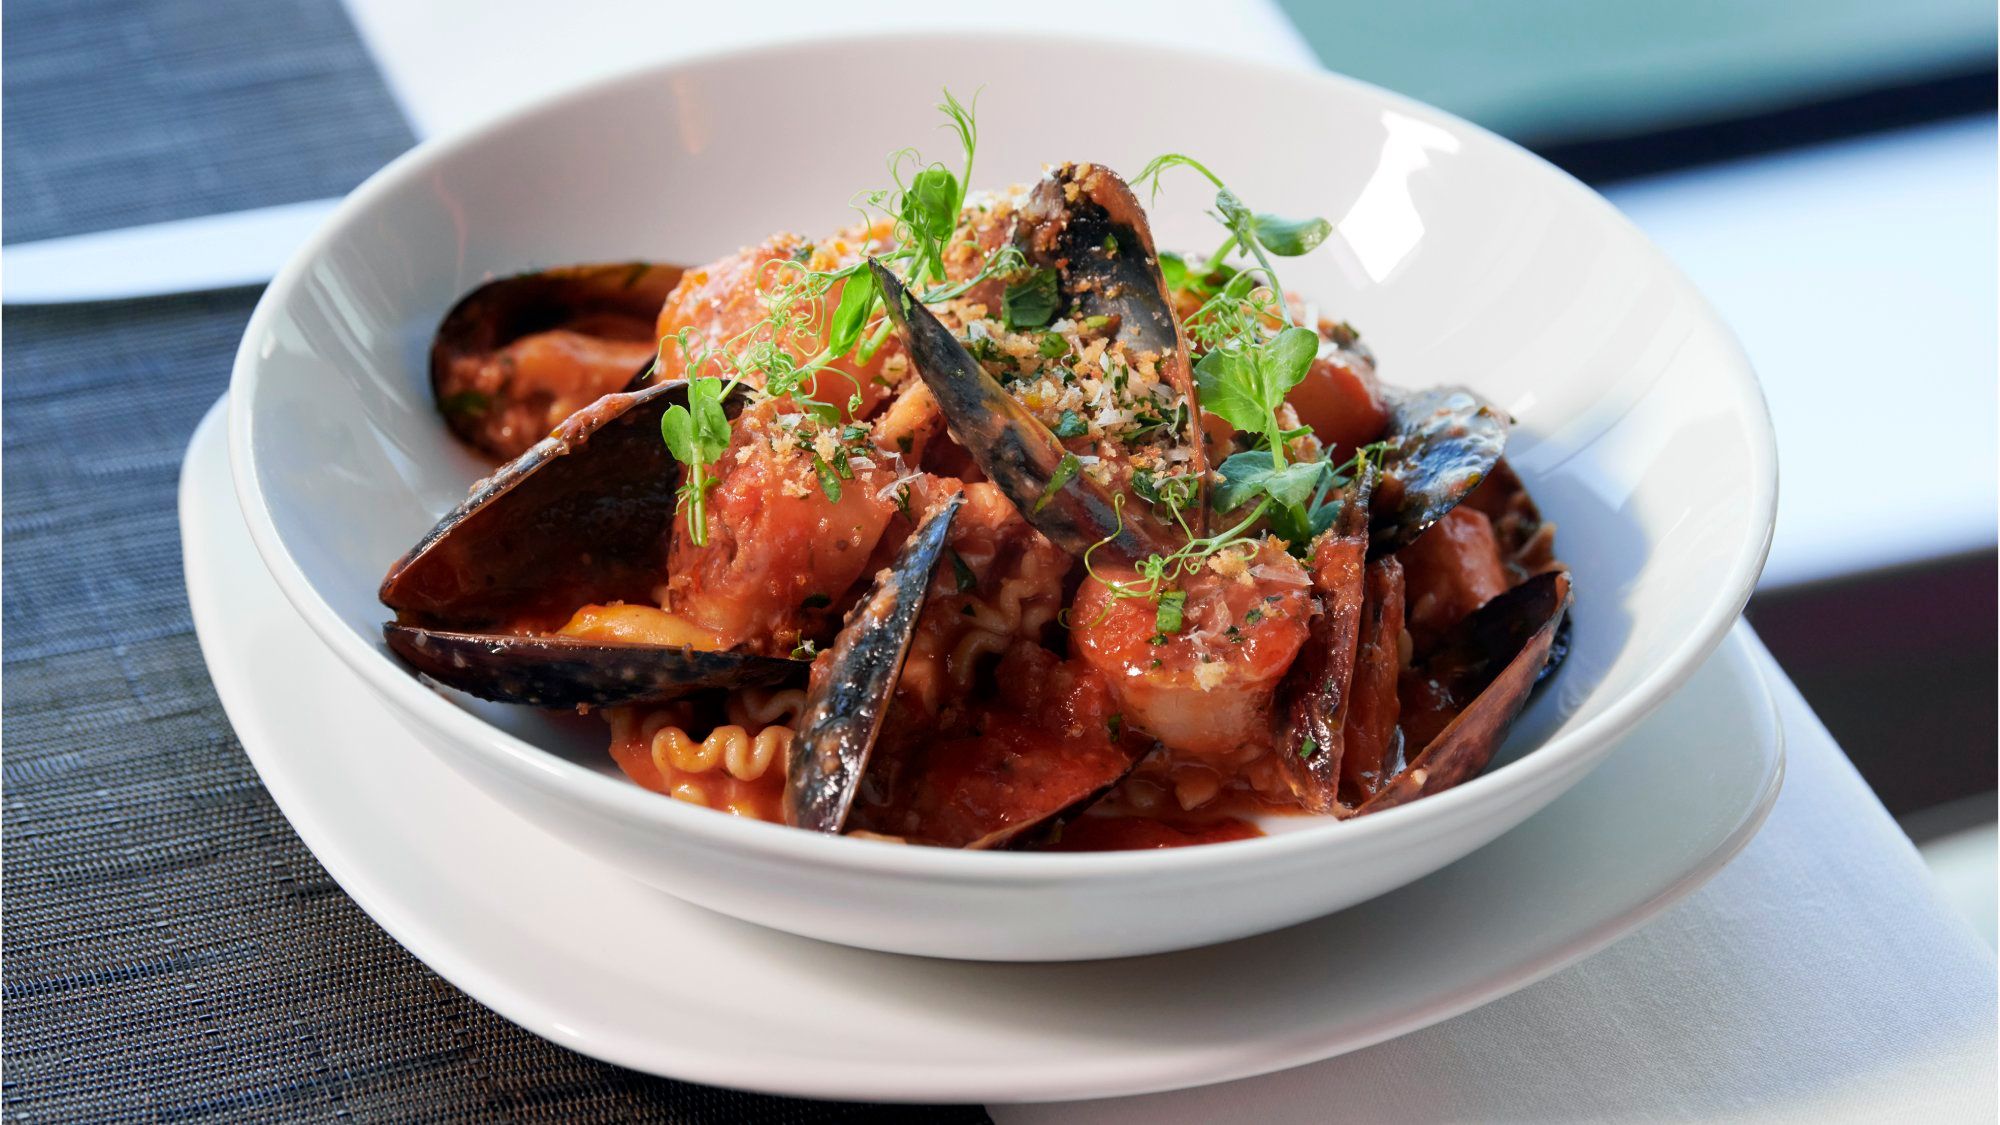 Trenette pasta with mussels, scallops and calamari in a seafood tomato reduction.